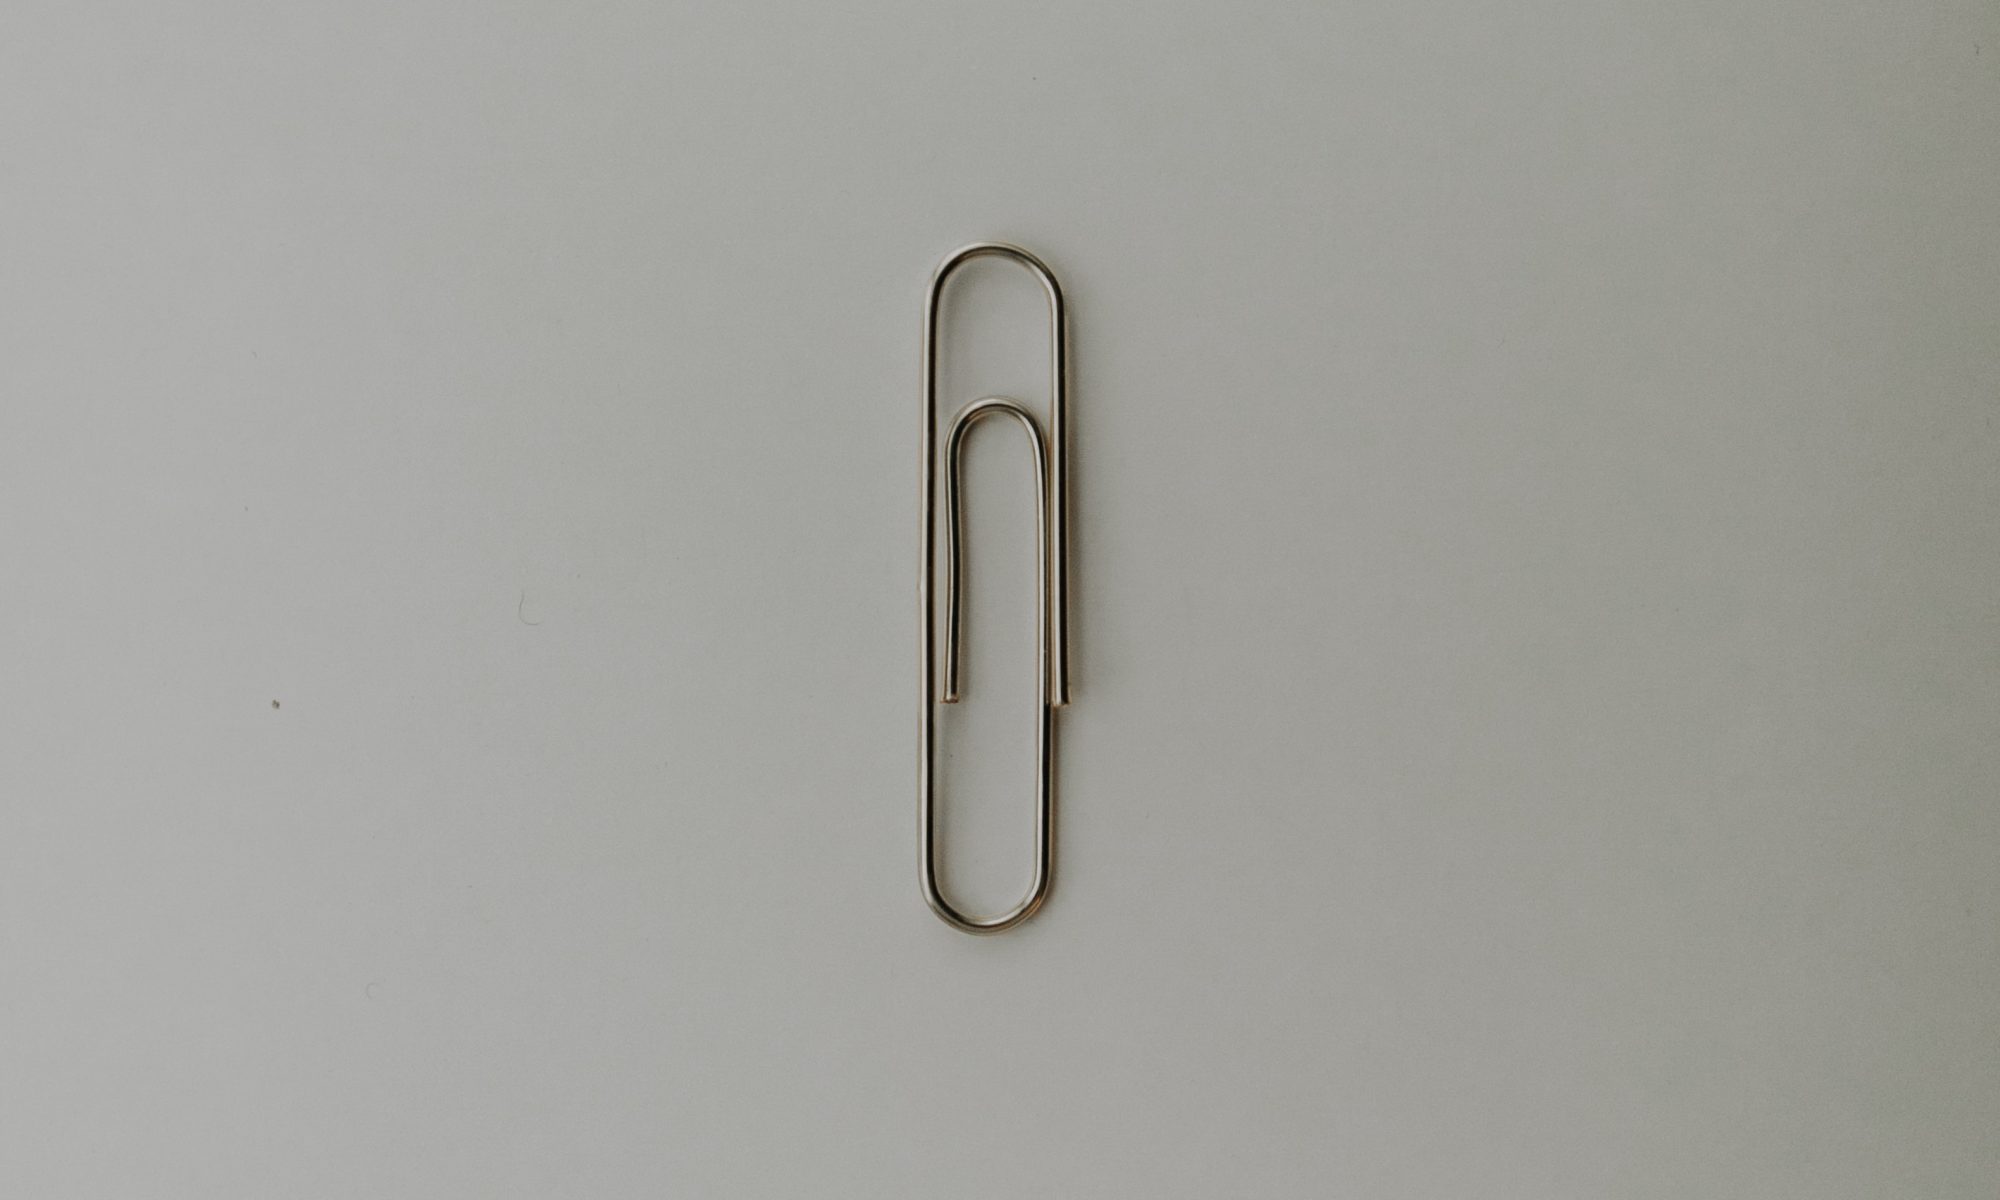 Photo of a paper clip; indicates simplicity